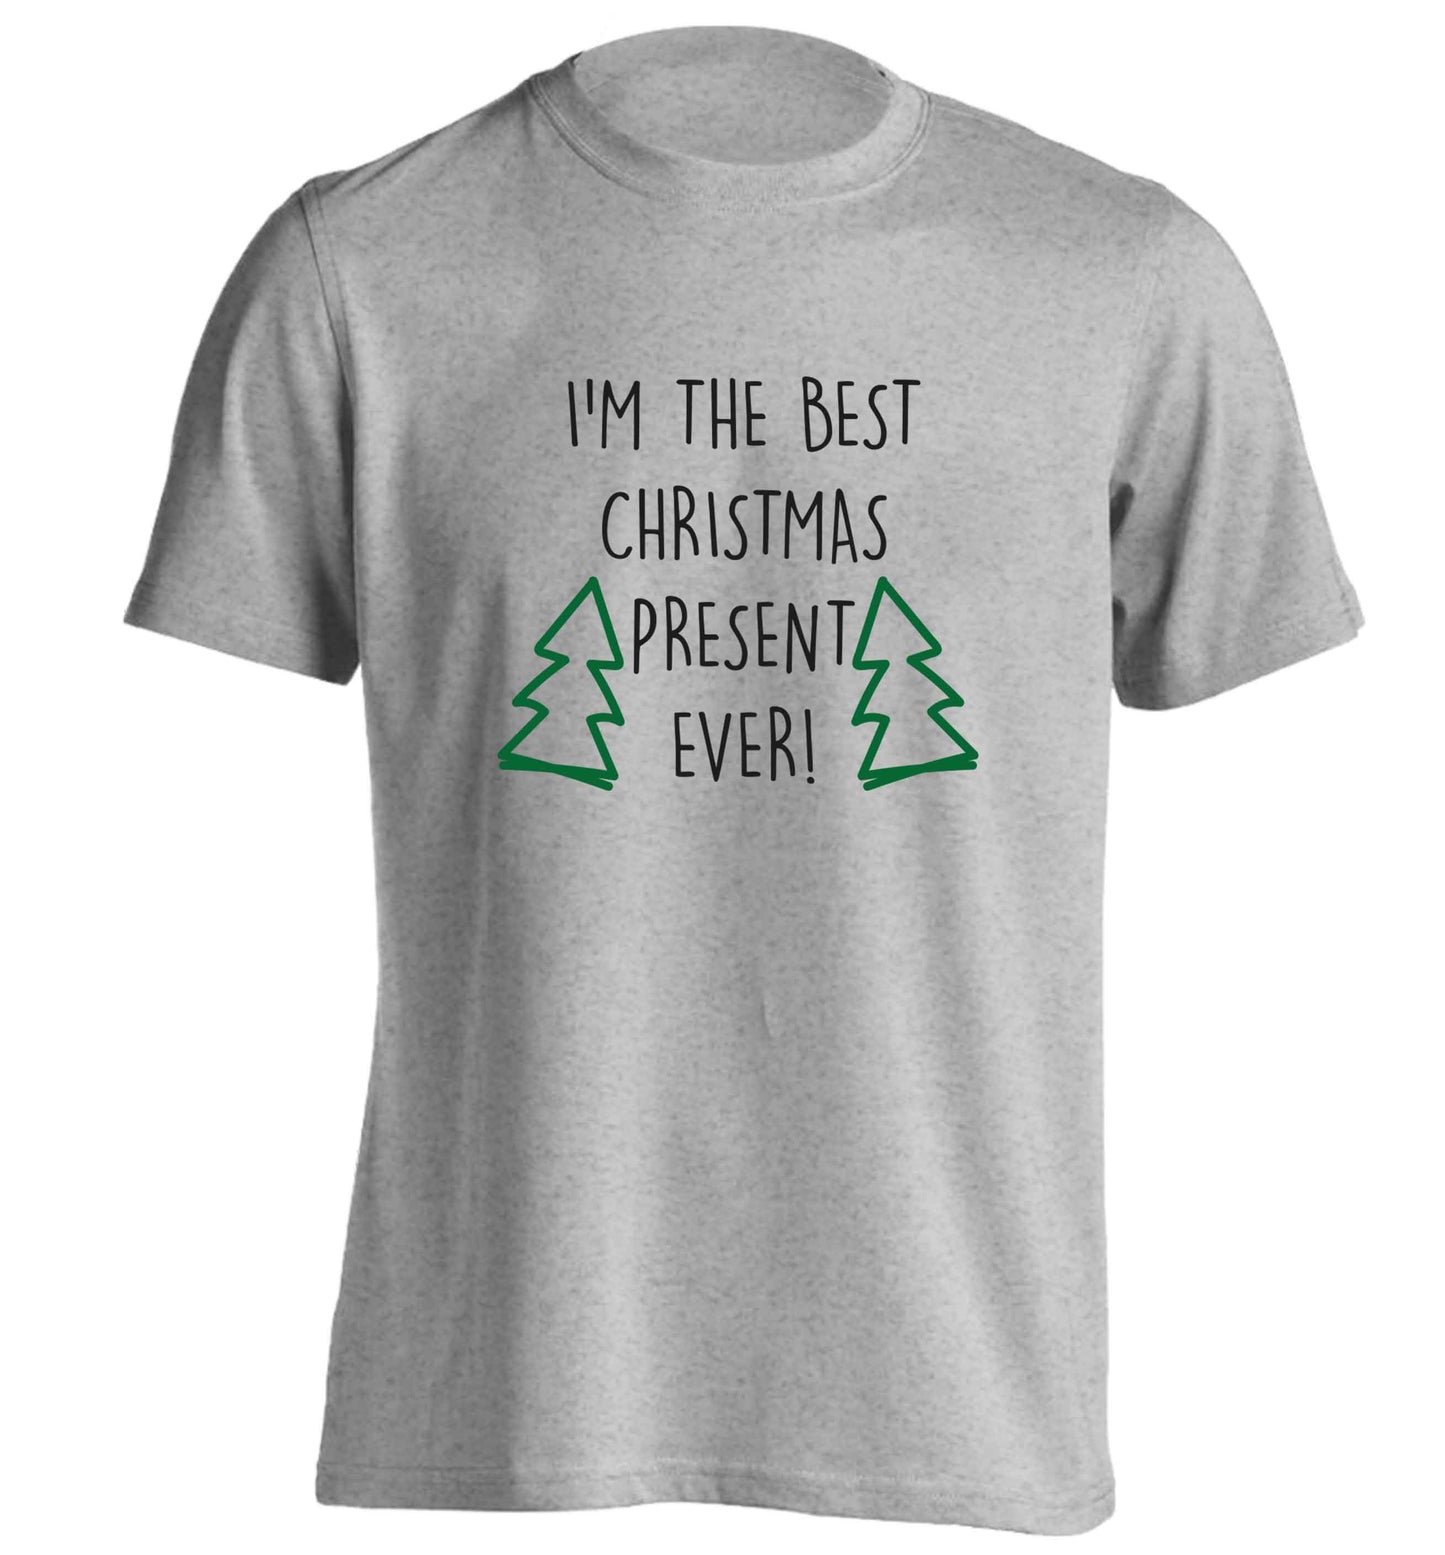 I'm the best Christmas present ever adults unisex grey Tshirt 2XL